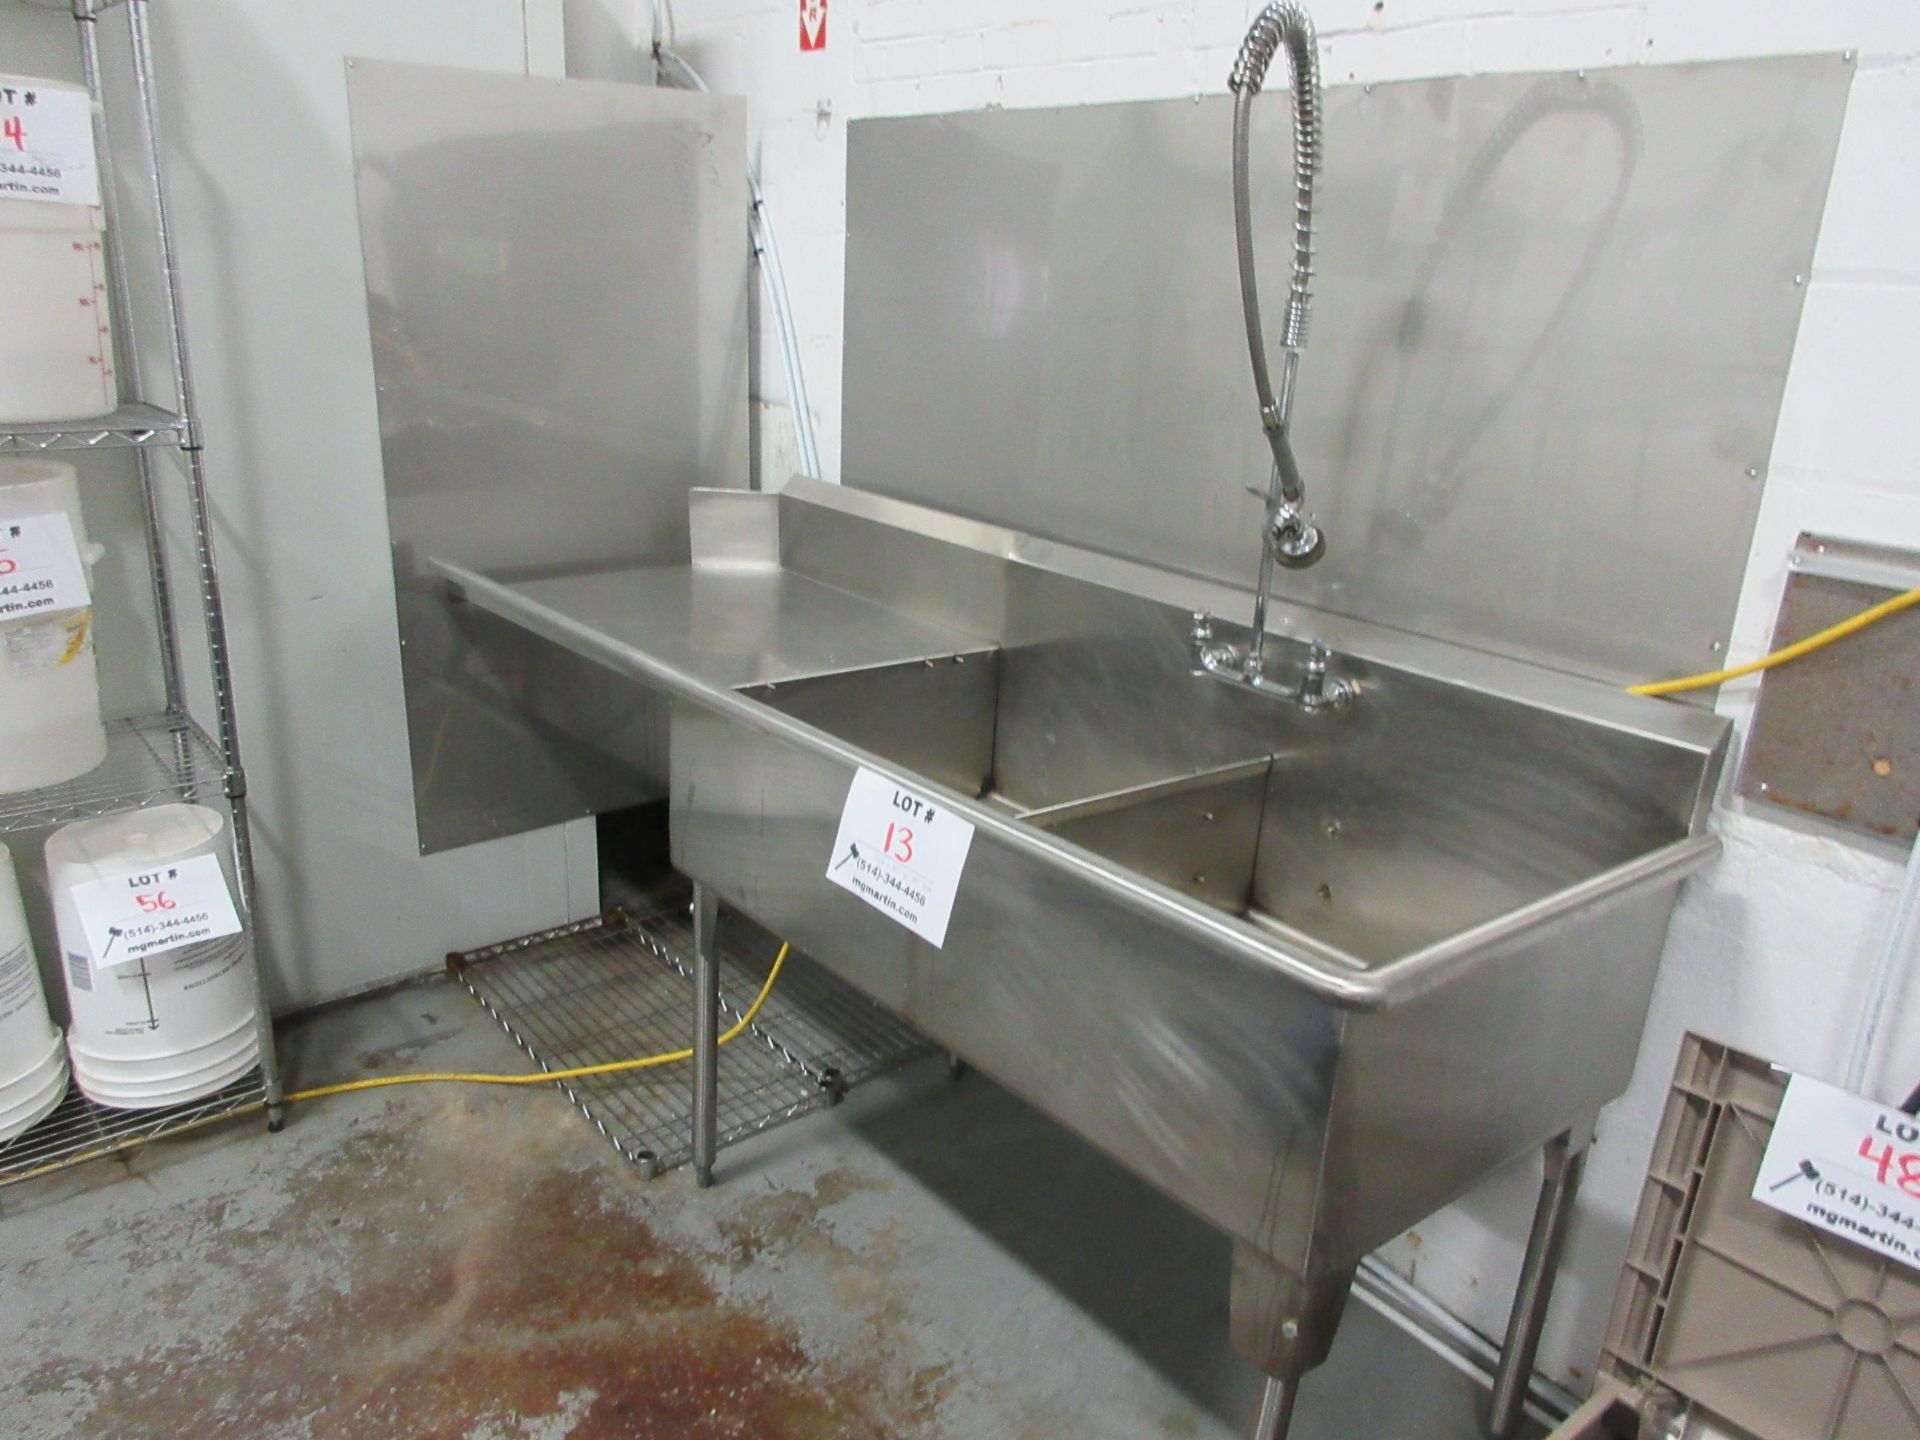 Double stainless steel sink c/w runoff & rincer 7 ft x 30" x 37" high (aprox)